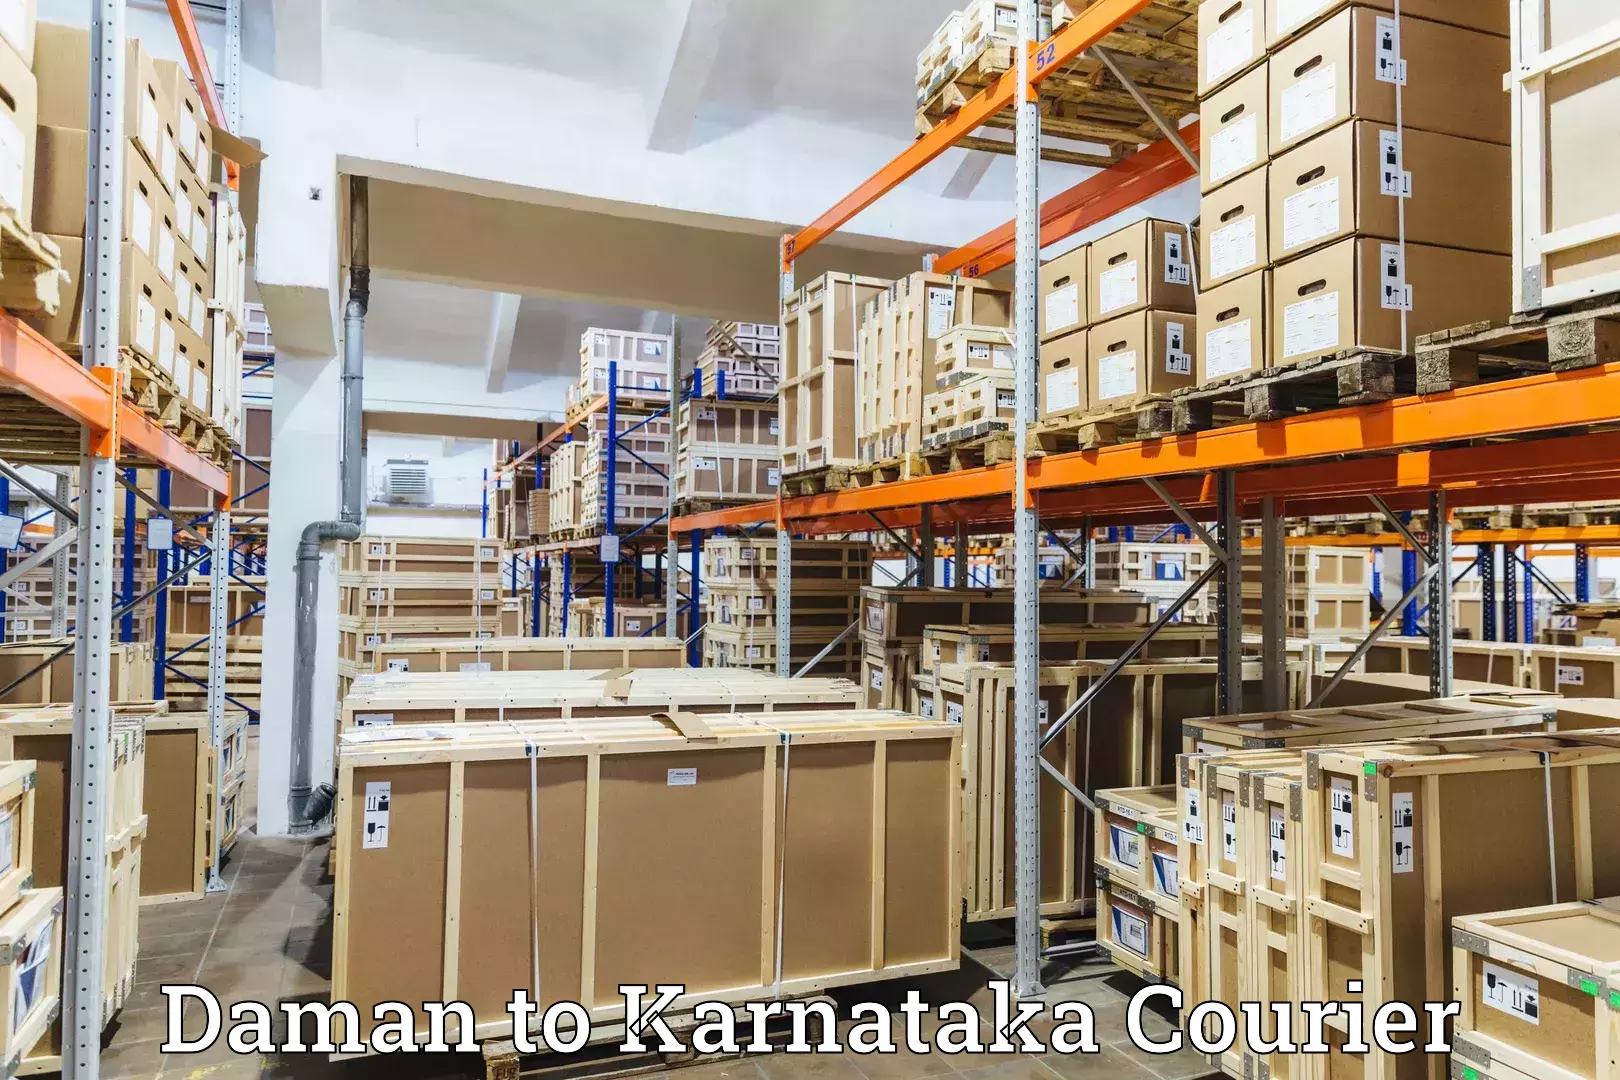 Subscription-based courier Daman to Gulbarga